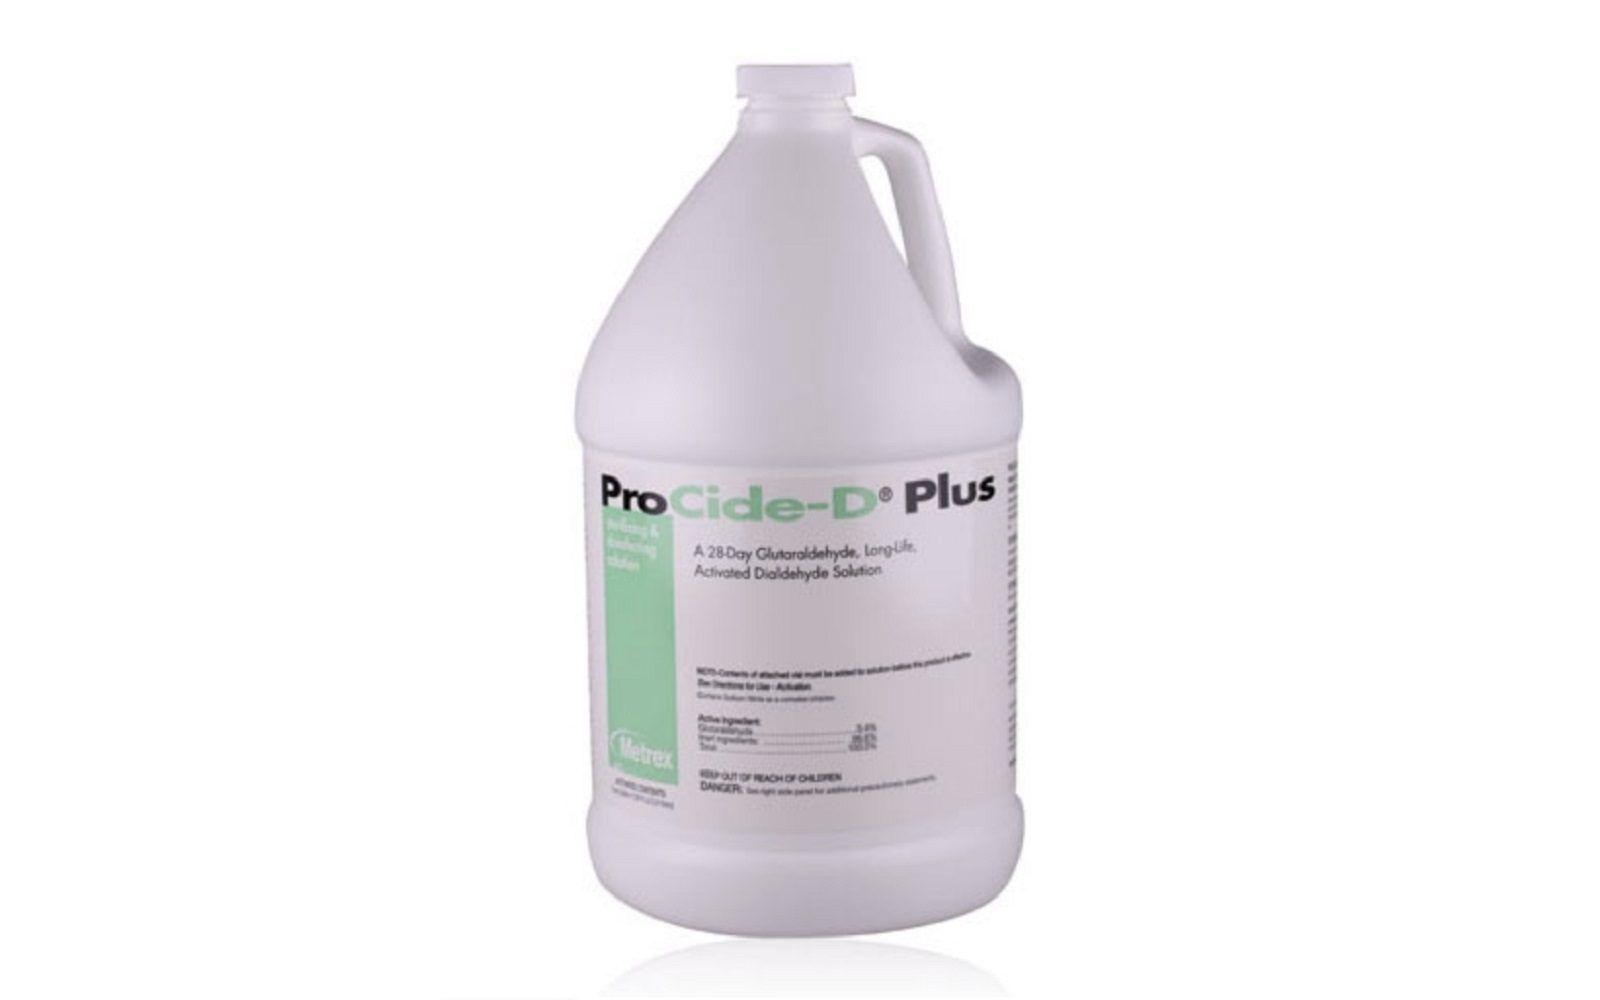 Procide d plus 3. 4% glutaraldehyde sterilant solution with activator, 1 gallon